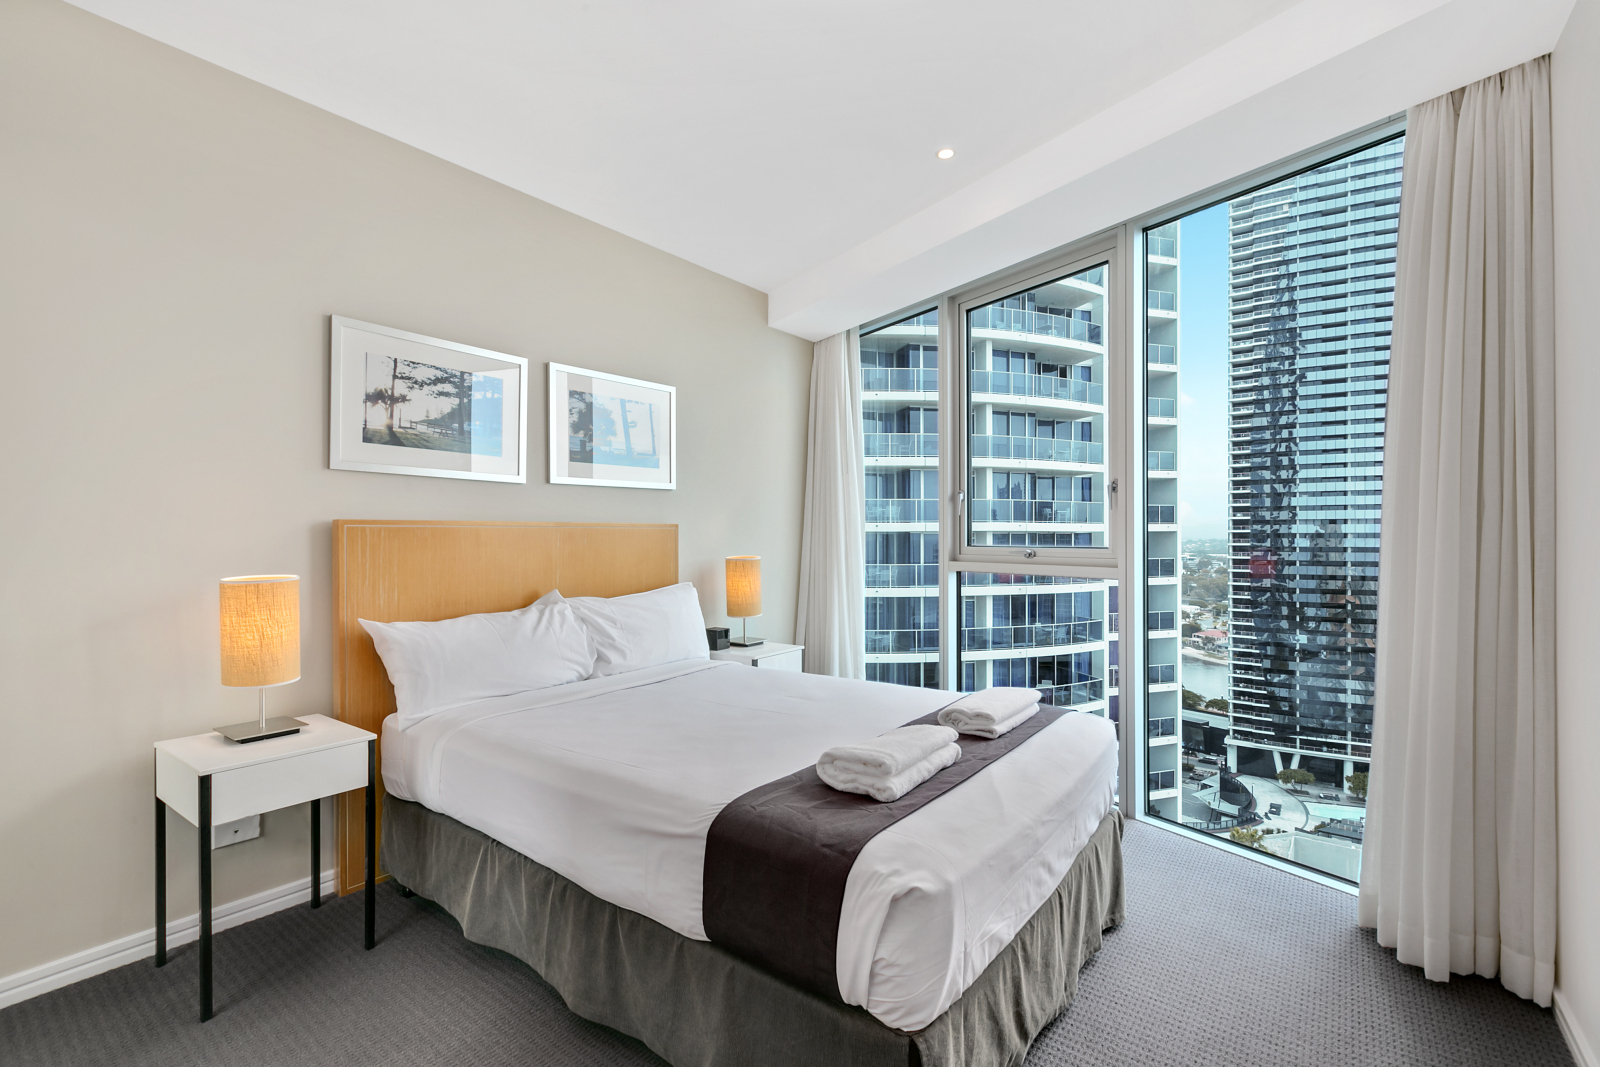 Second Bedroom with Nerang River views